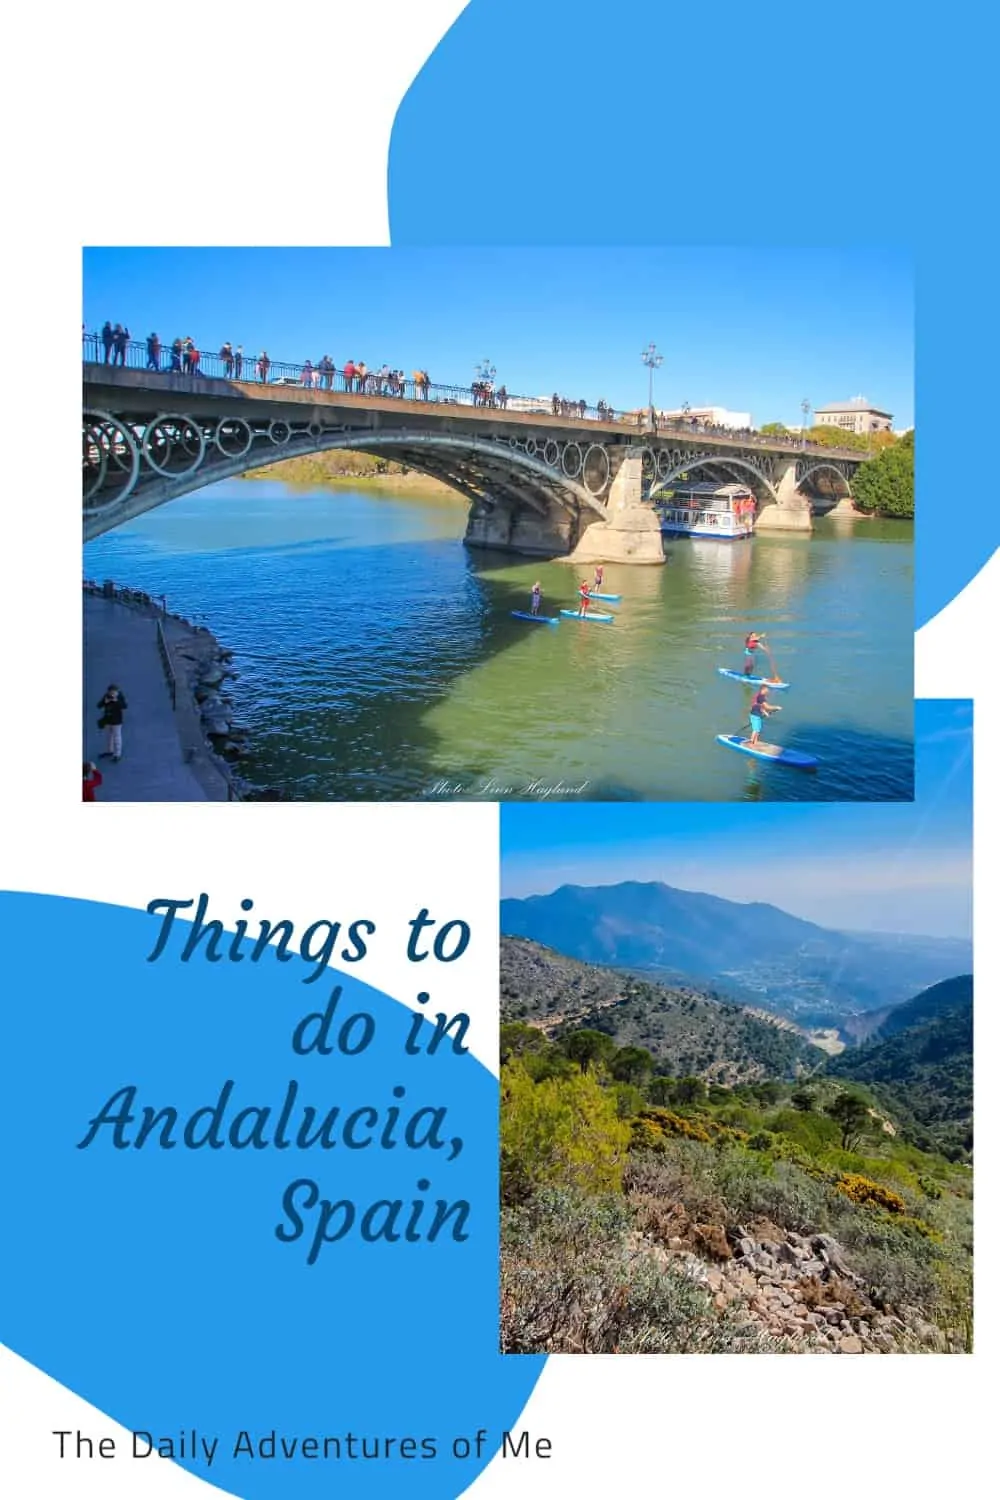 Looking for the best things to do in Spain? Explore Andalucía in the south full of history, culture and natural beauty. #thingstodoinSpain #AndaluciaSpain #SouthernSpain